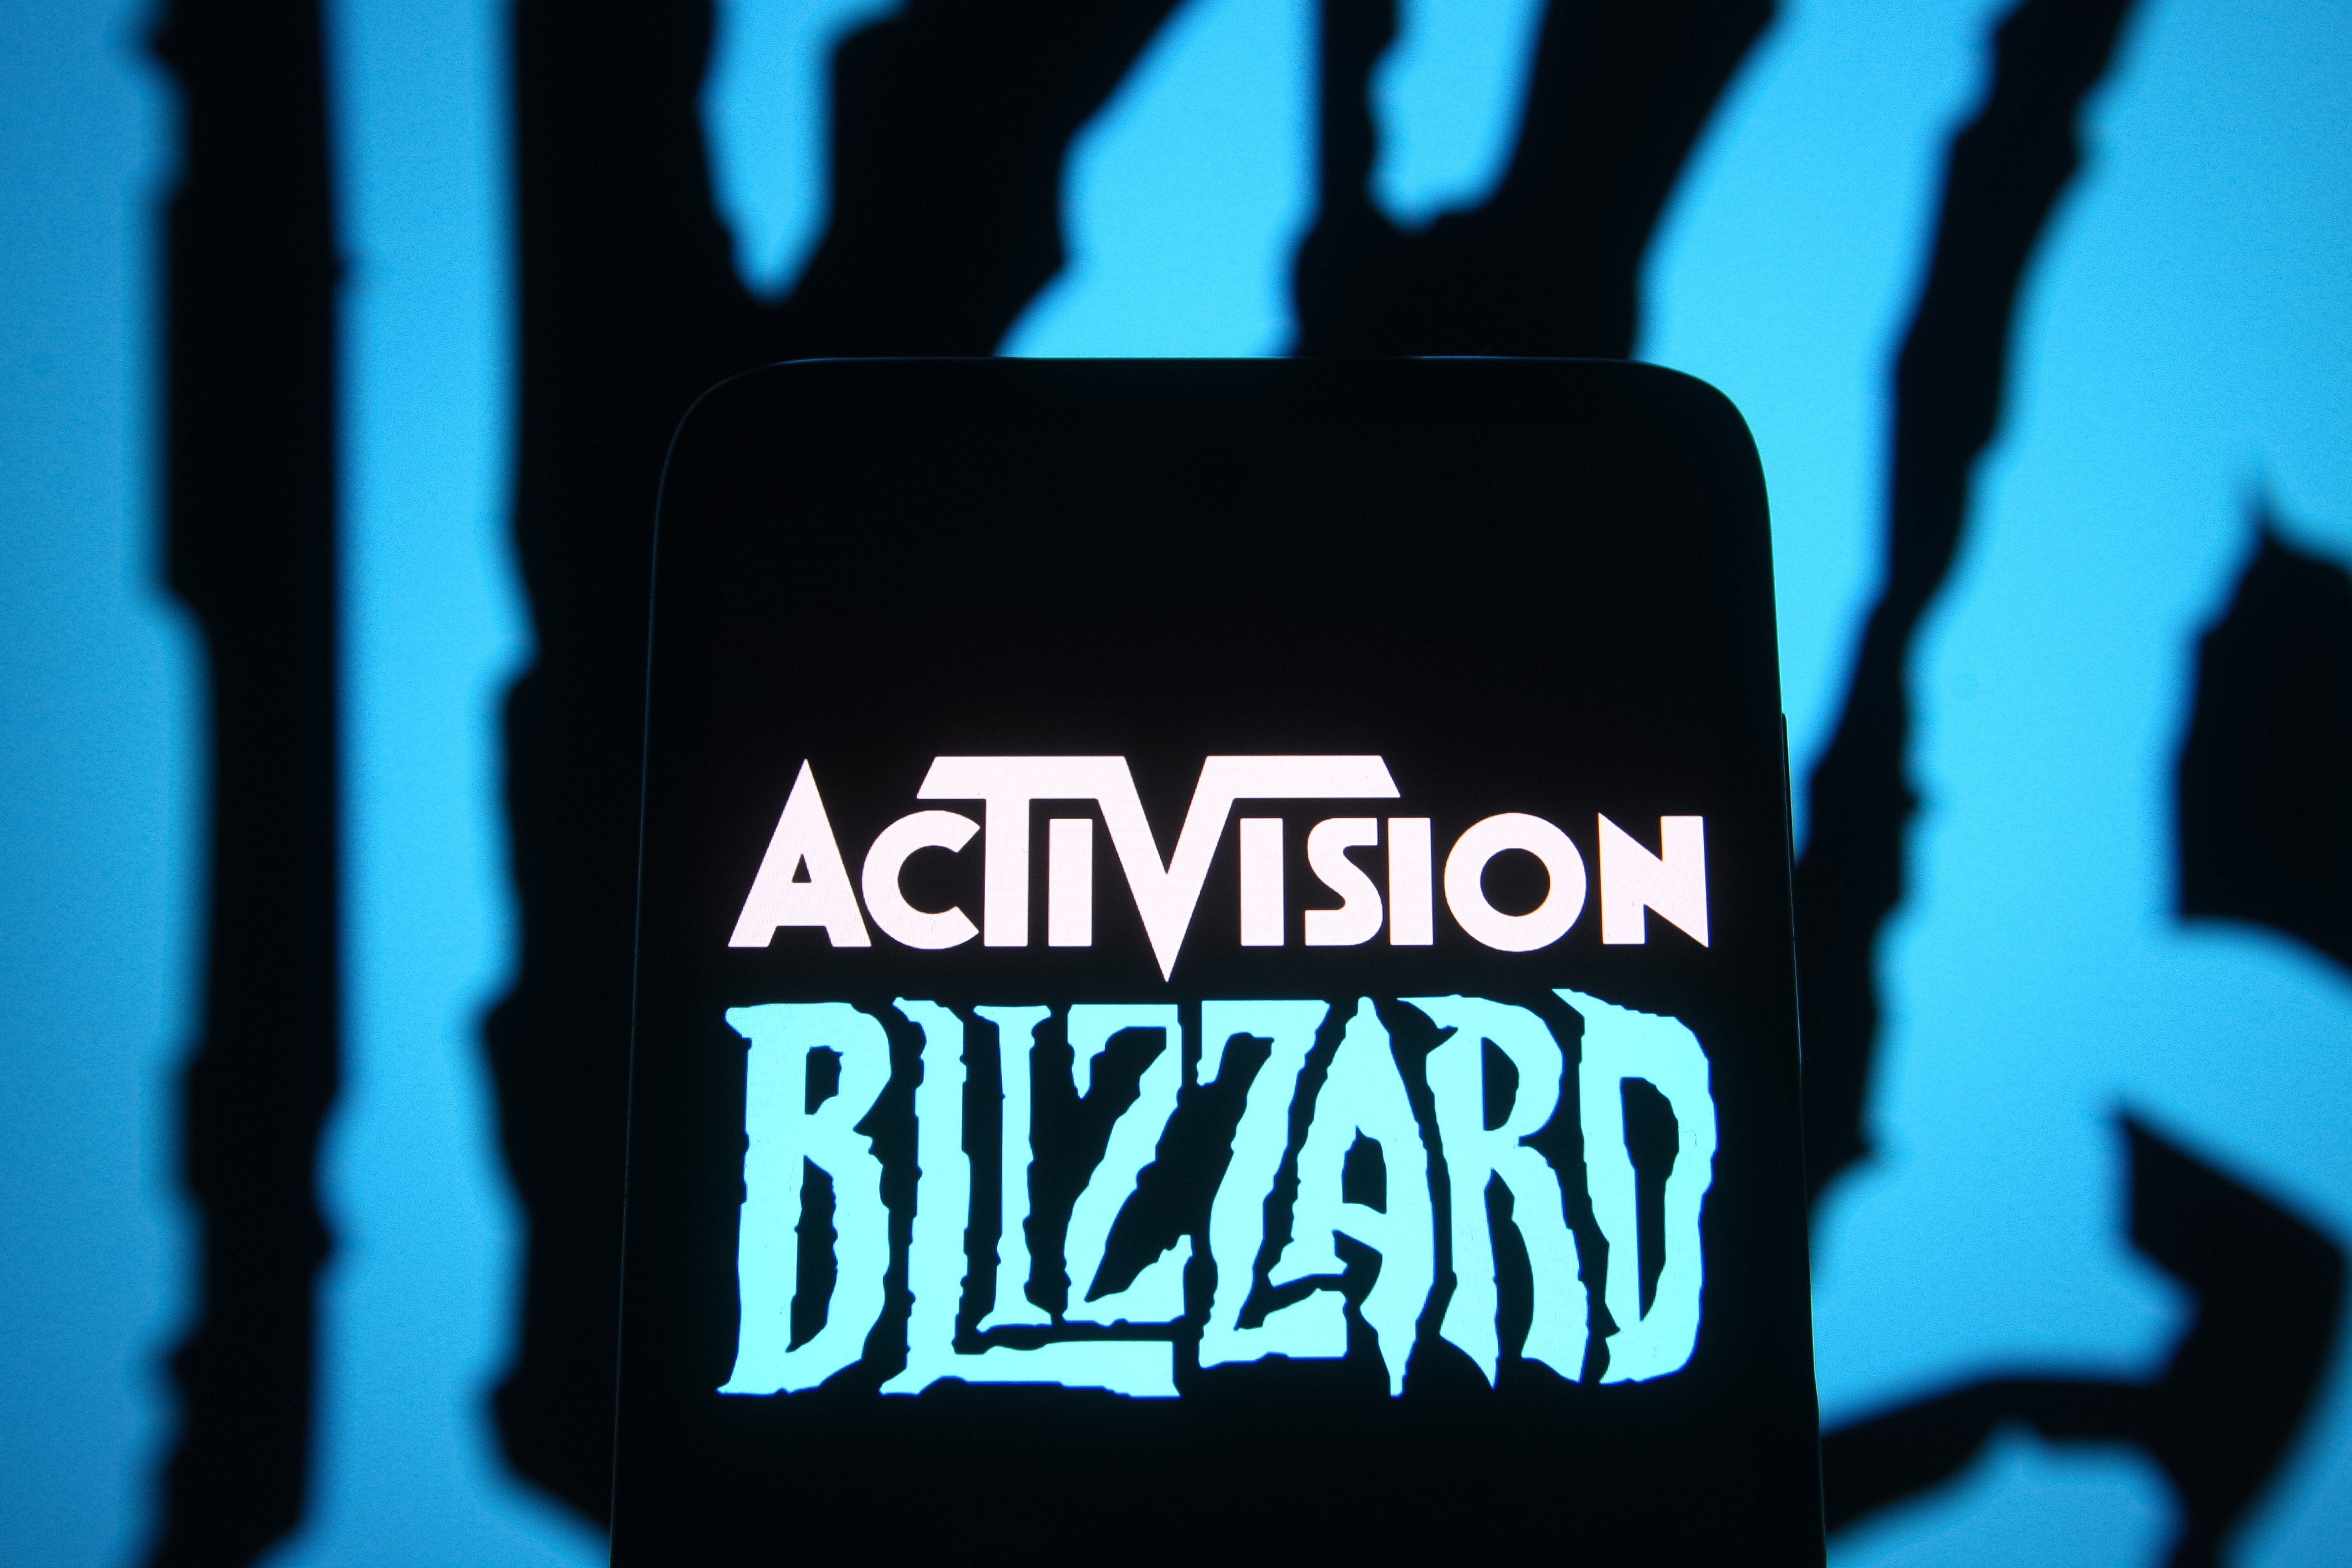 The Activision Blizzard logo, against a blue and black background.